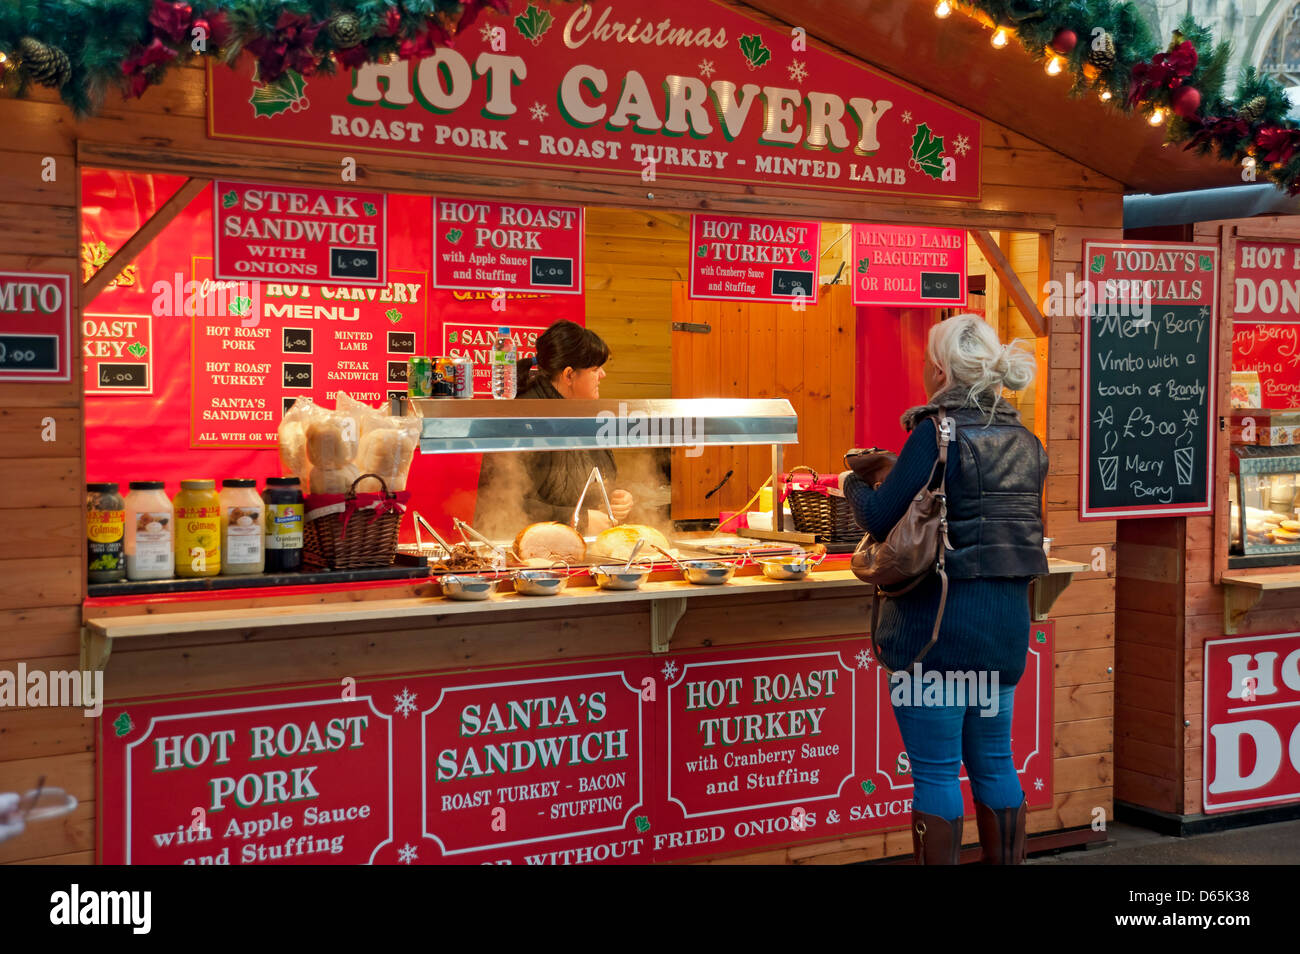 Christmas market stall selling hot meat meats carvery street food in winter York North Yorkshire England UK United Kingdom GB Great Britain Stock Photo